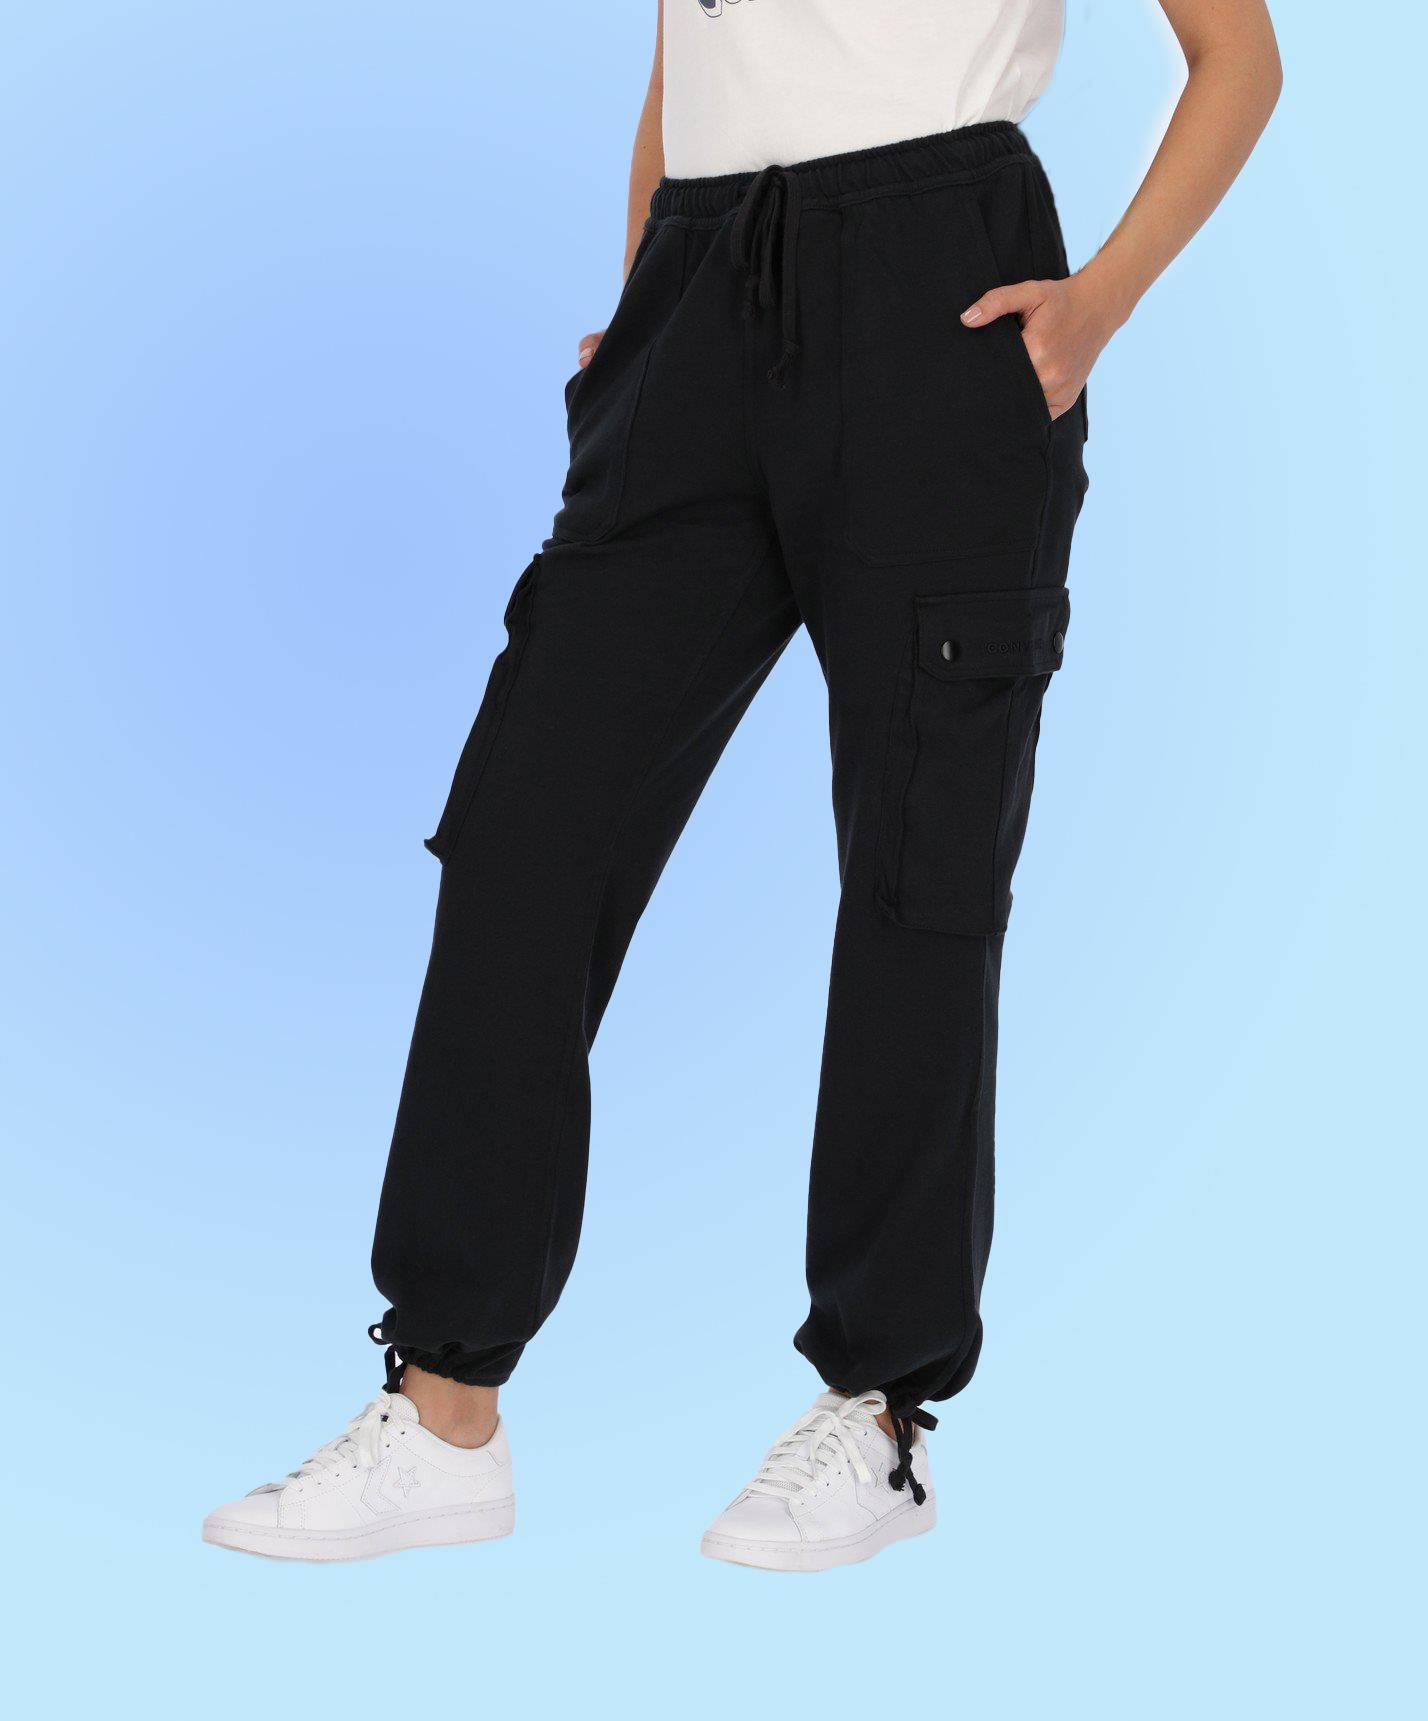 Converse ELEVATED SEASONAL KNIT PANT black - Free delivery | Spartoo NET !  - Clothing Cargo trousers Men USD/$61.60